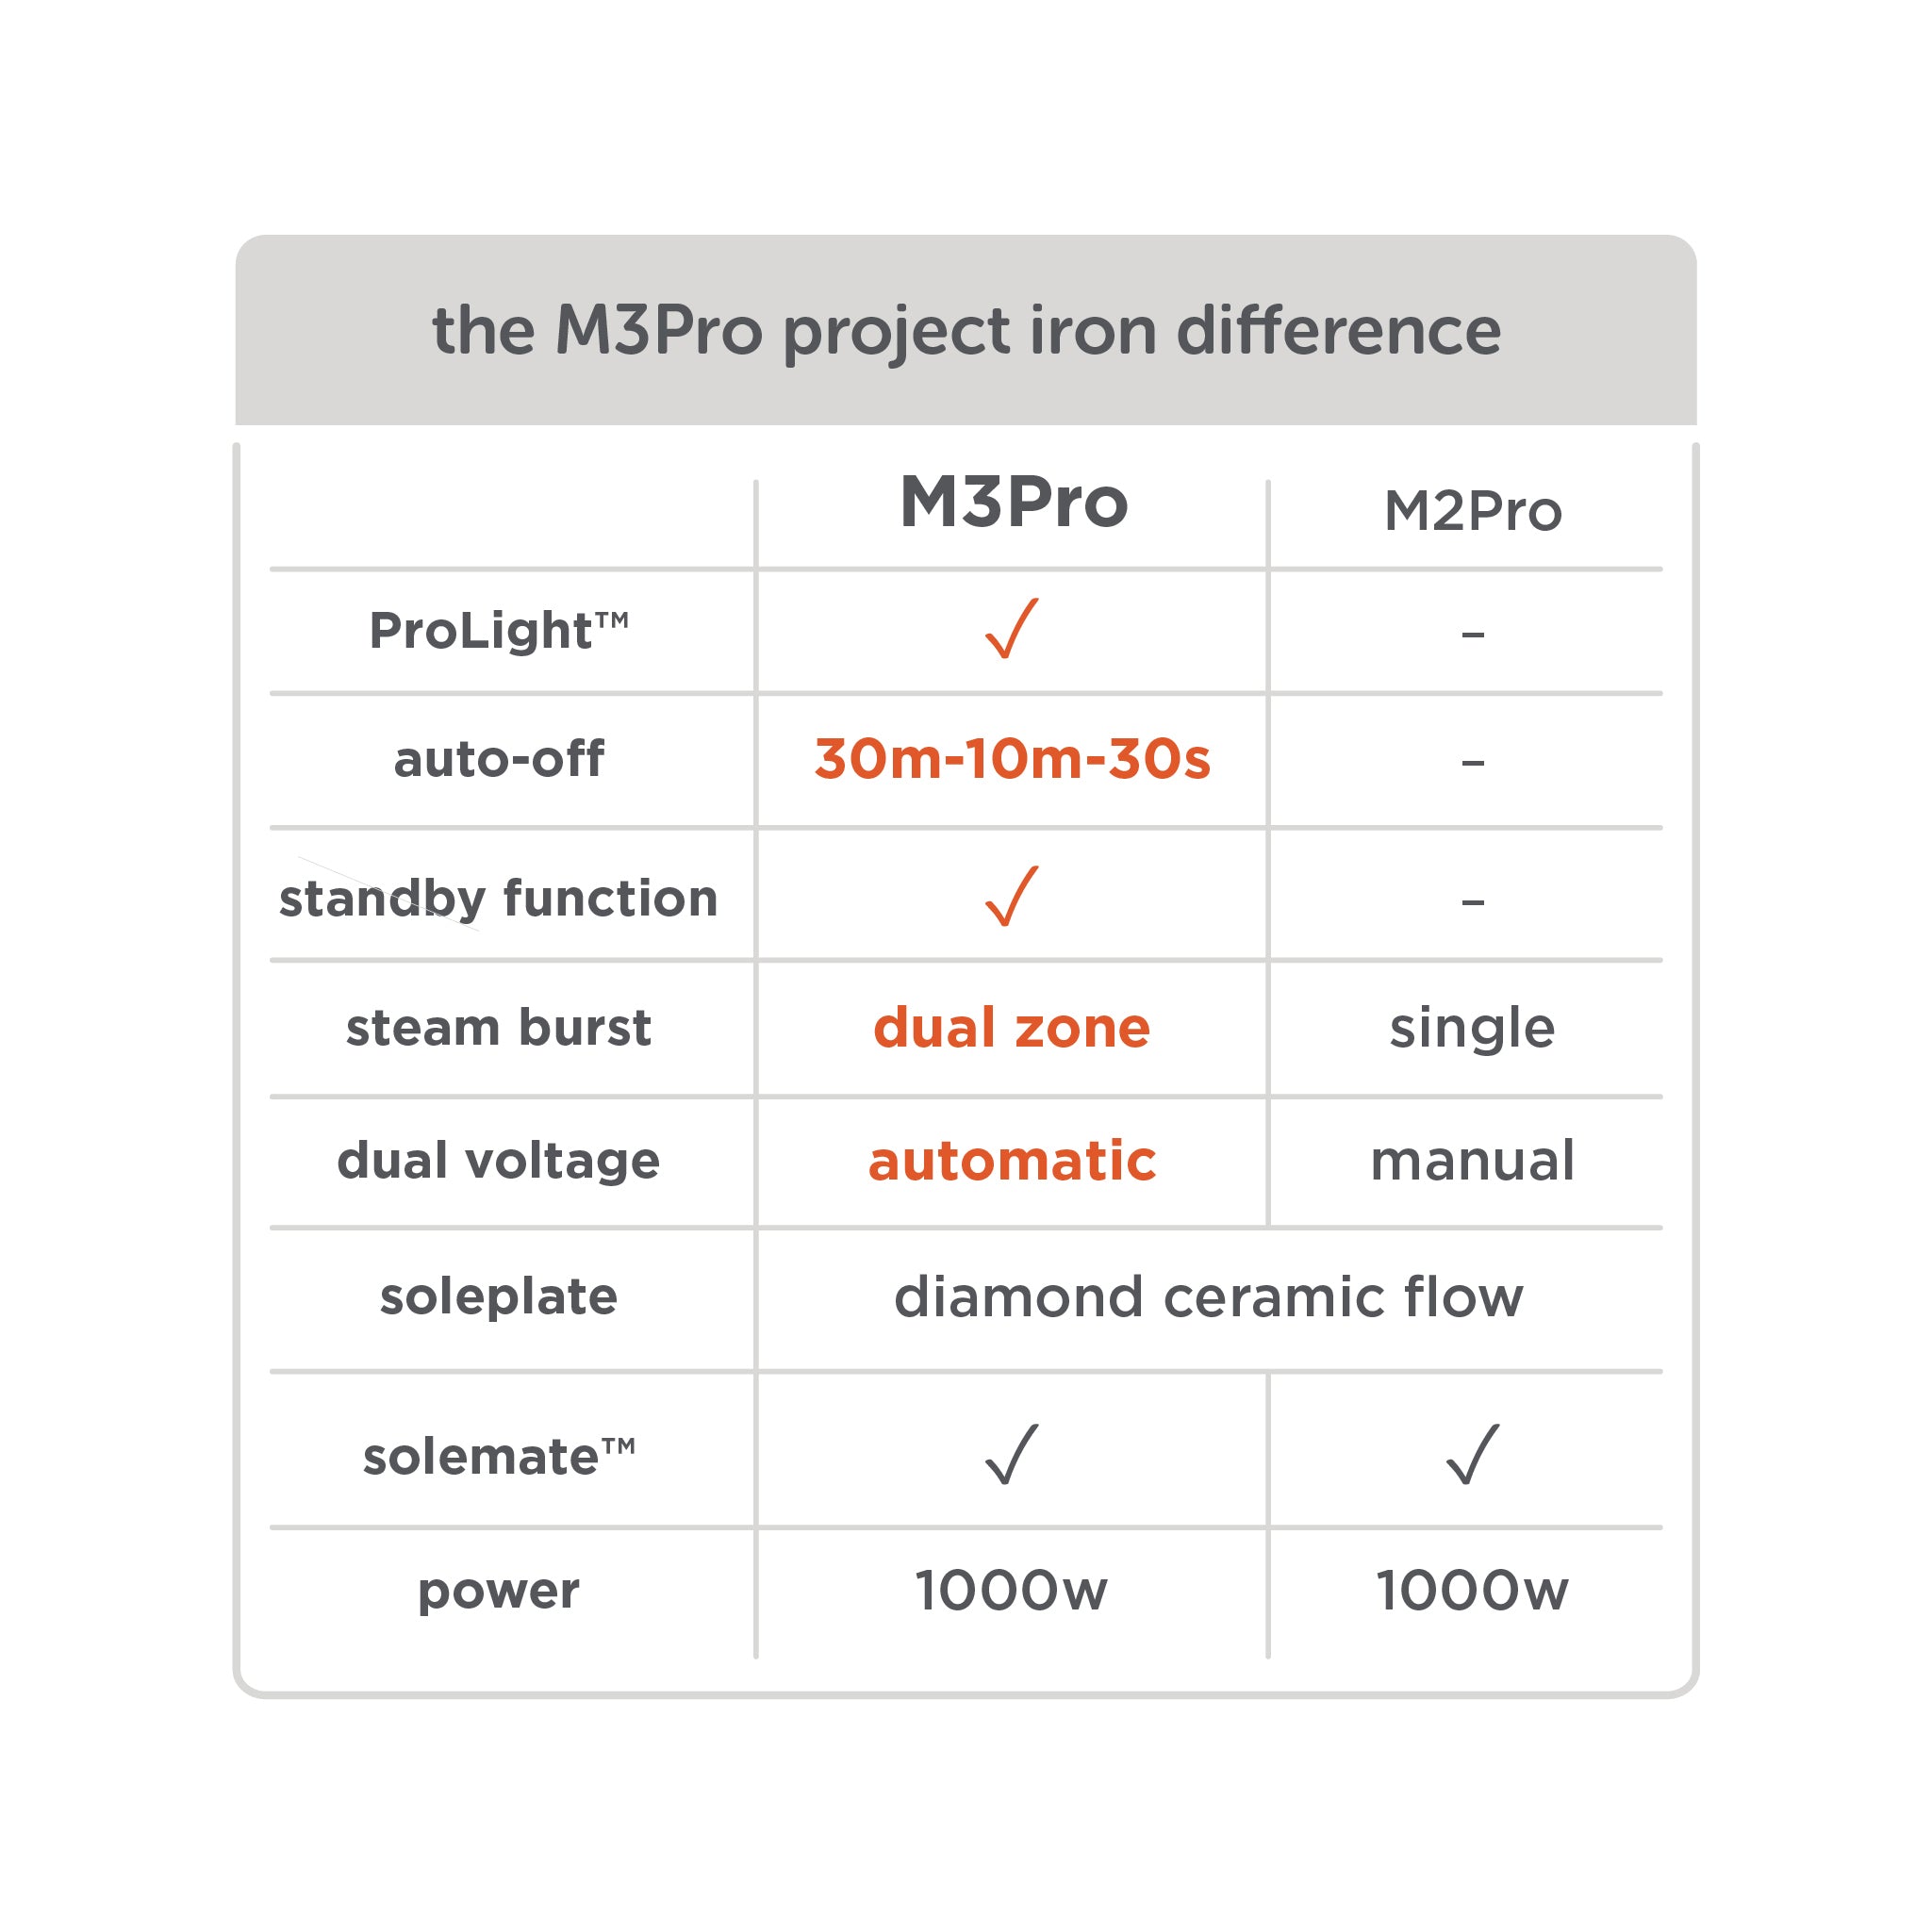 The comparison chart shows the main differences between the M3Pro and M2Pro: ProLight, extended 30-minute  auto-off, standby button, dual-zone steam, and automatic dual voltage.